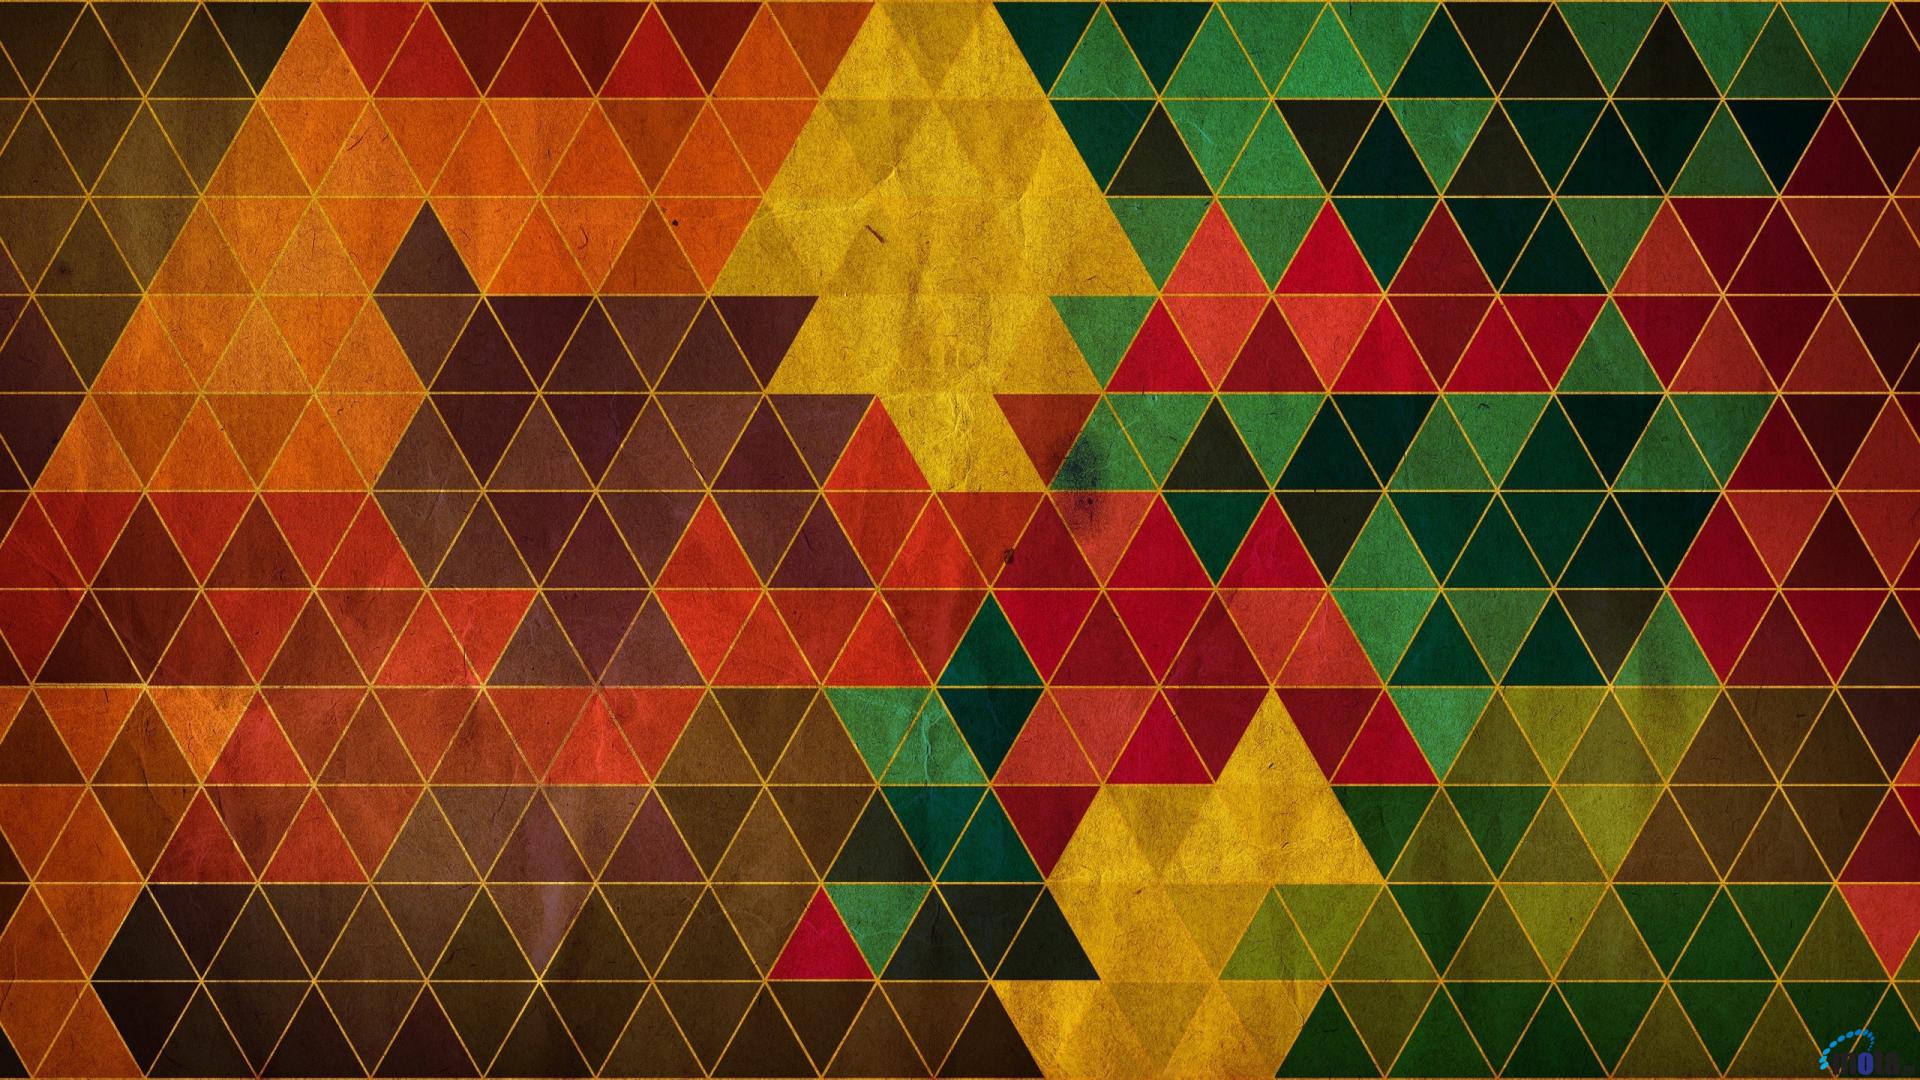 Download Wallpaper Triangle mosaic 1920 x 1080 HDTV 1080p